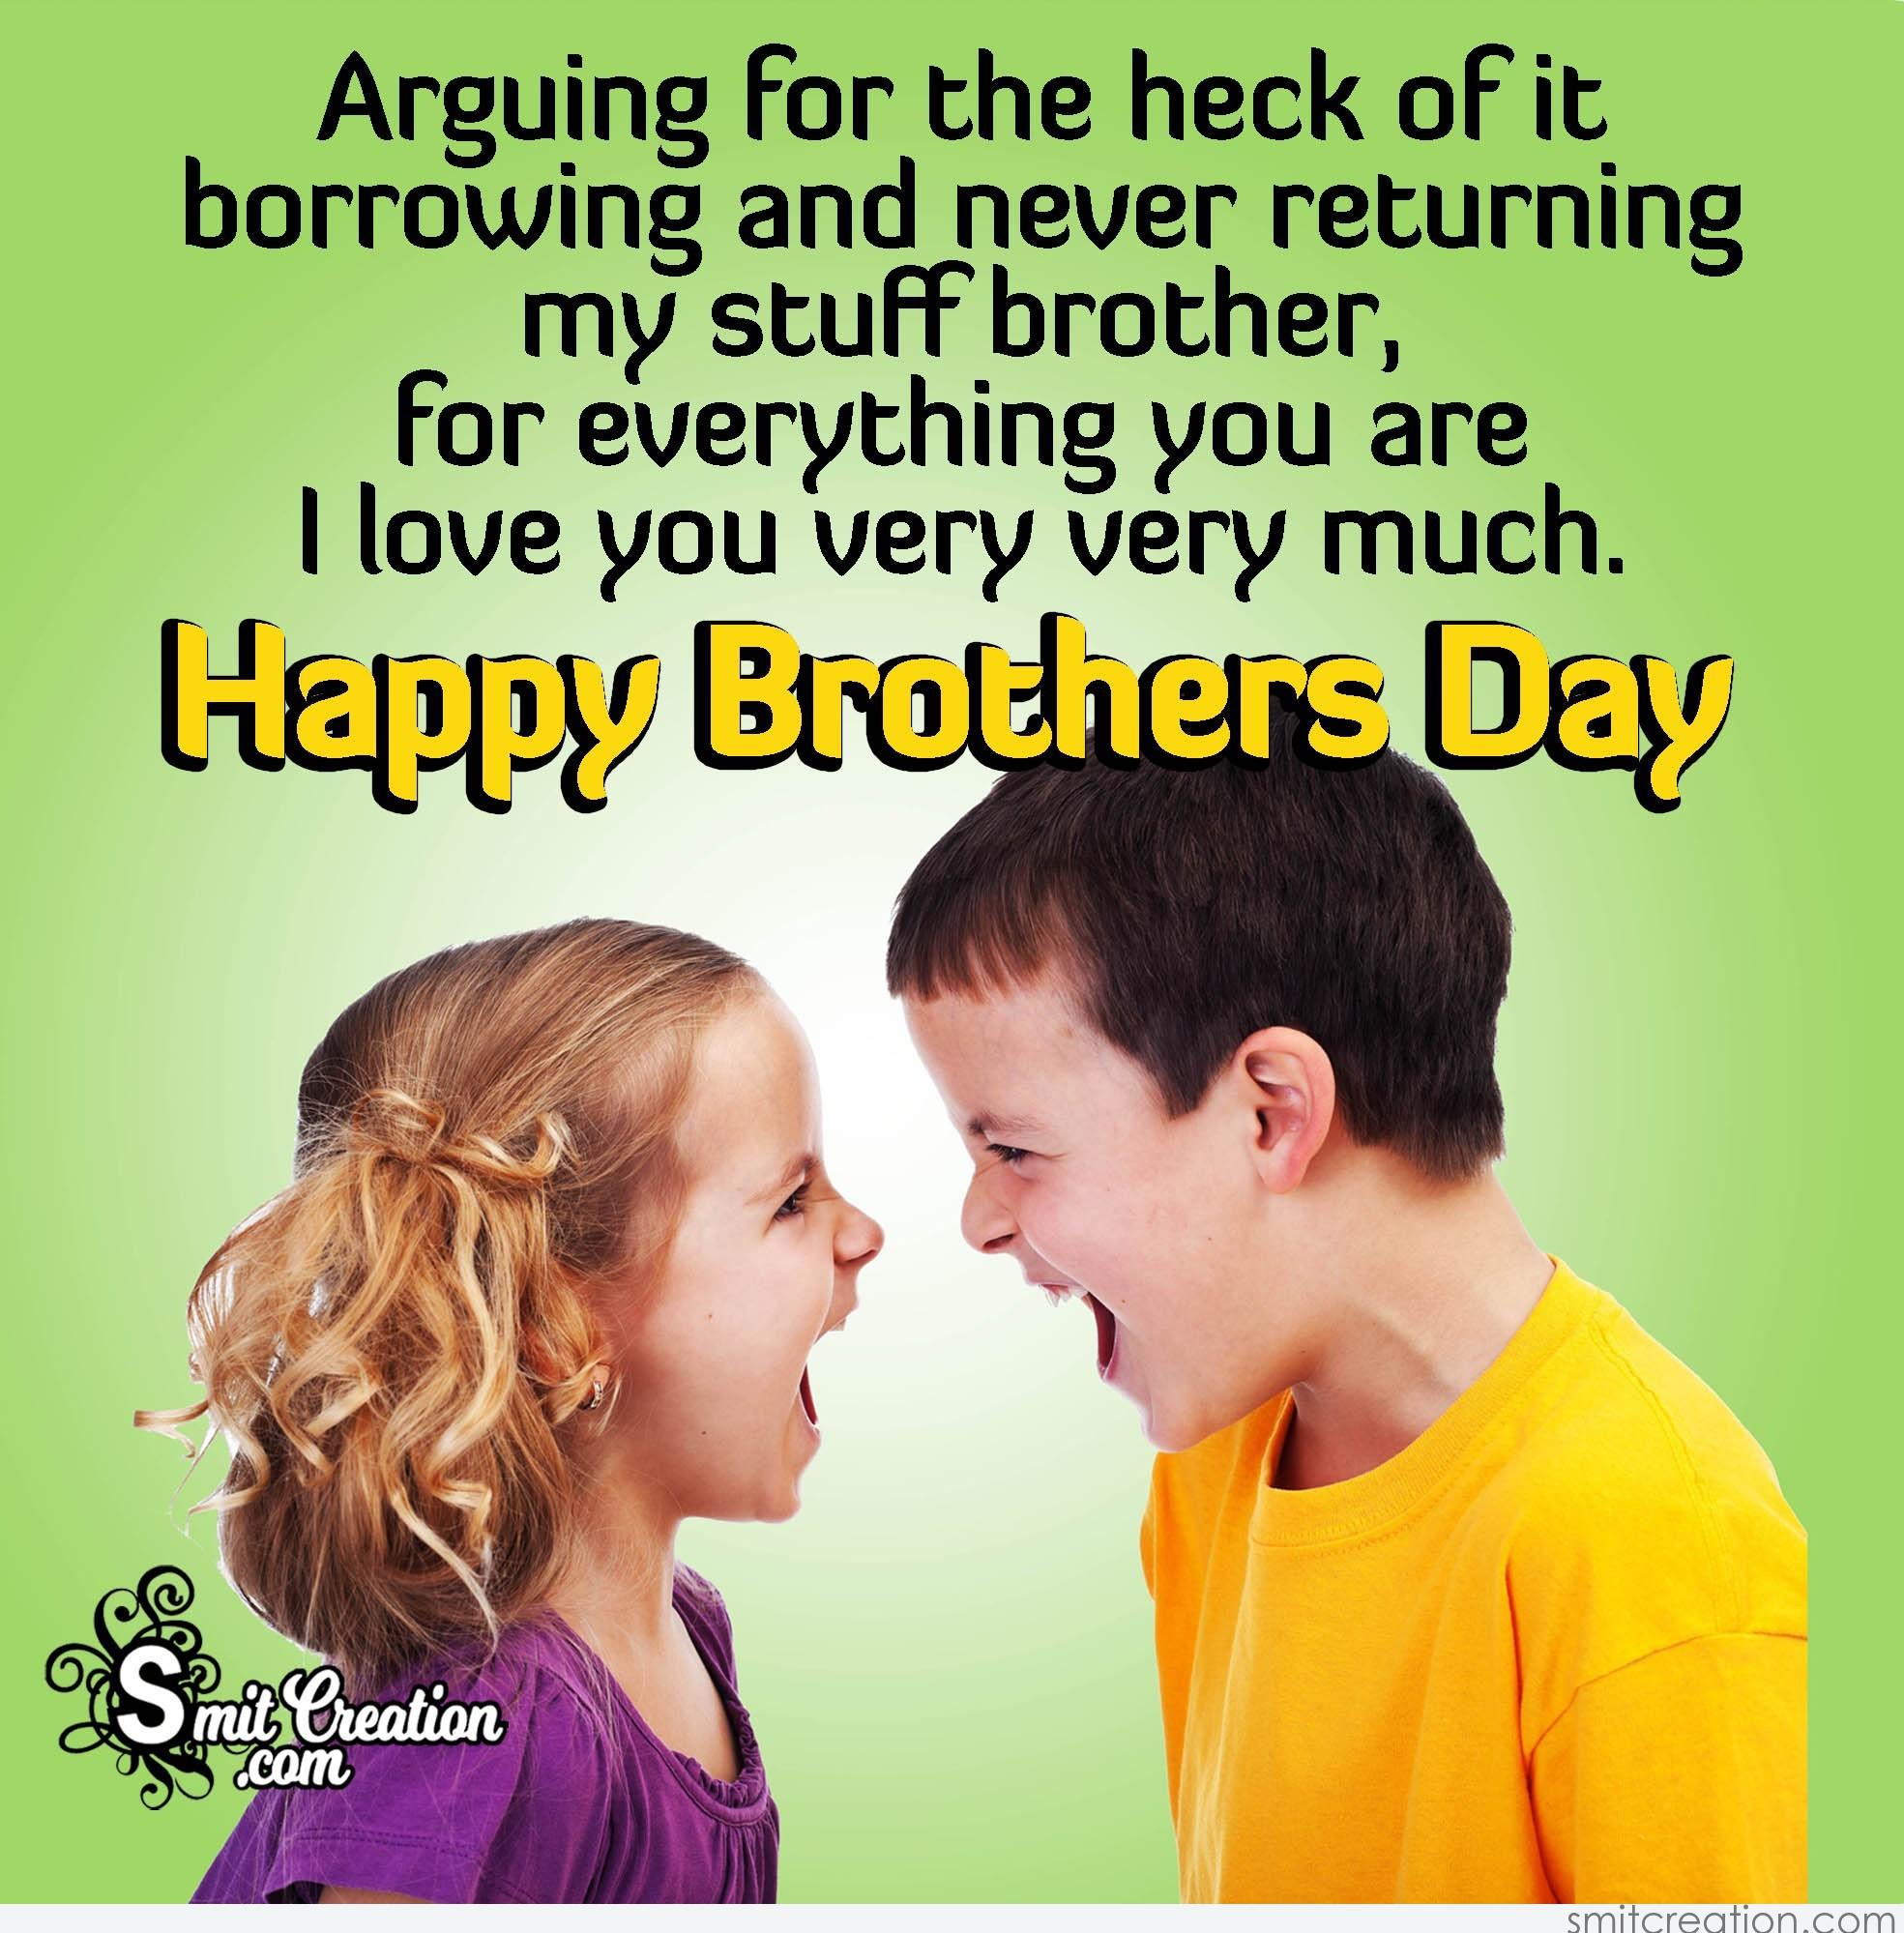 Happy Brothers Day 2022  Wishes Quotes Messages Greetings Images   SMSJAM